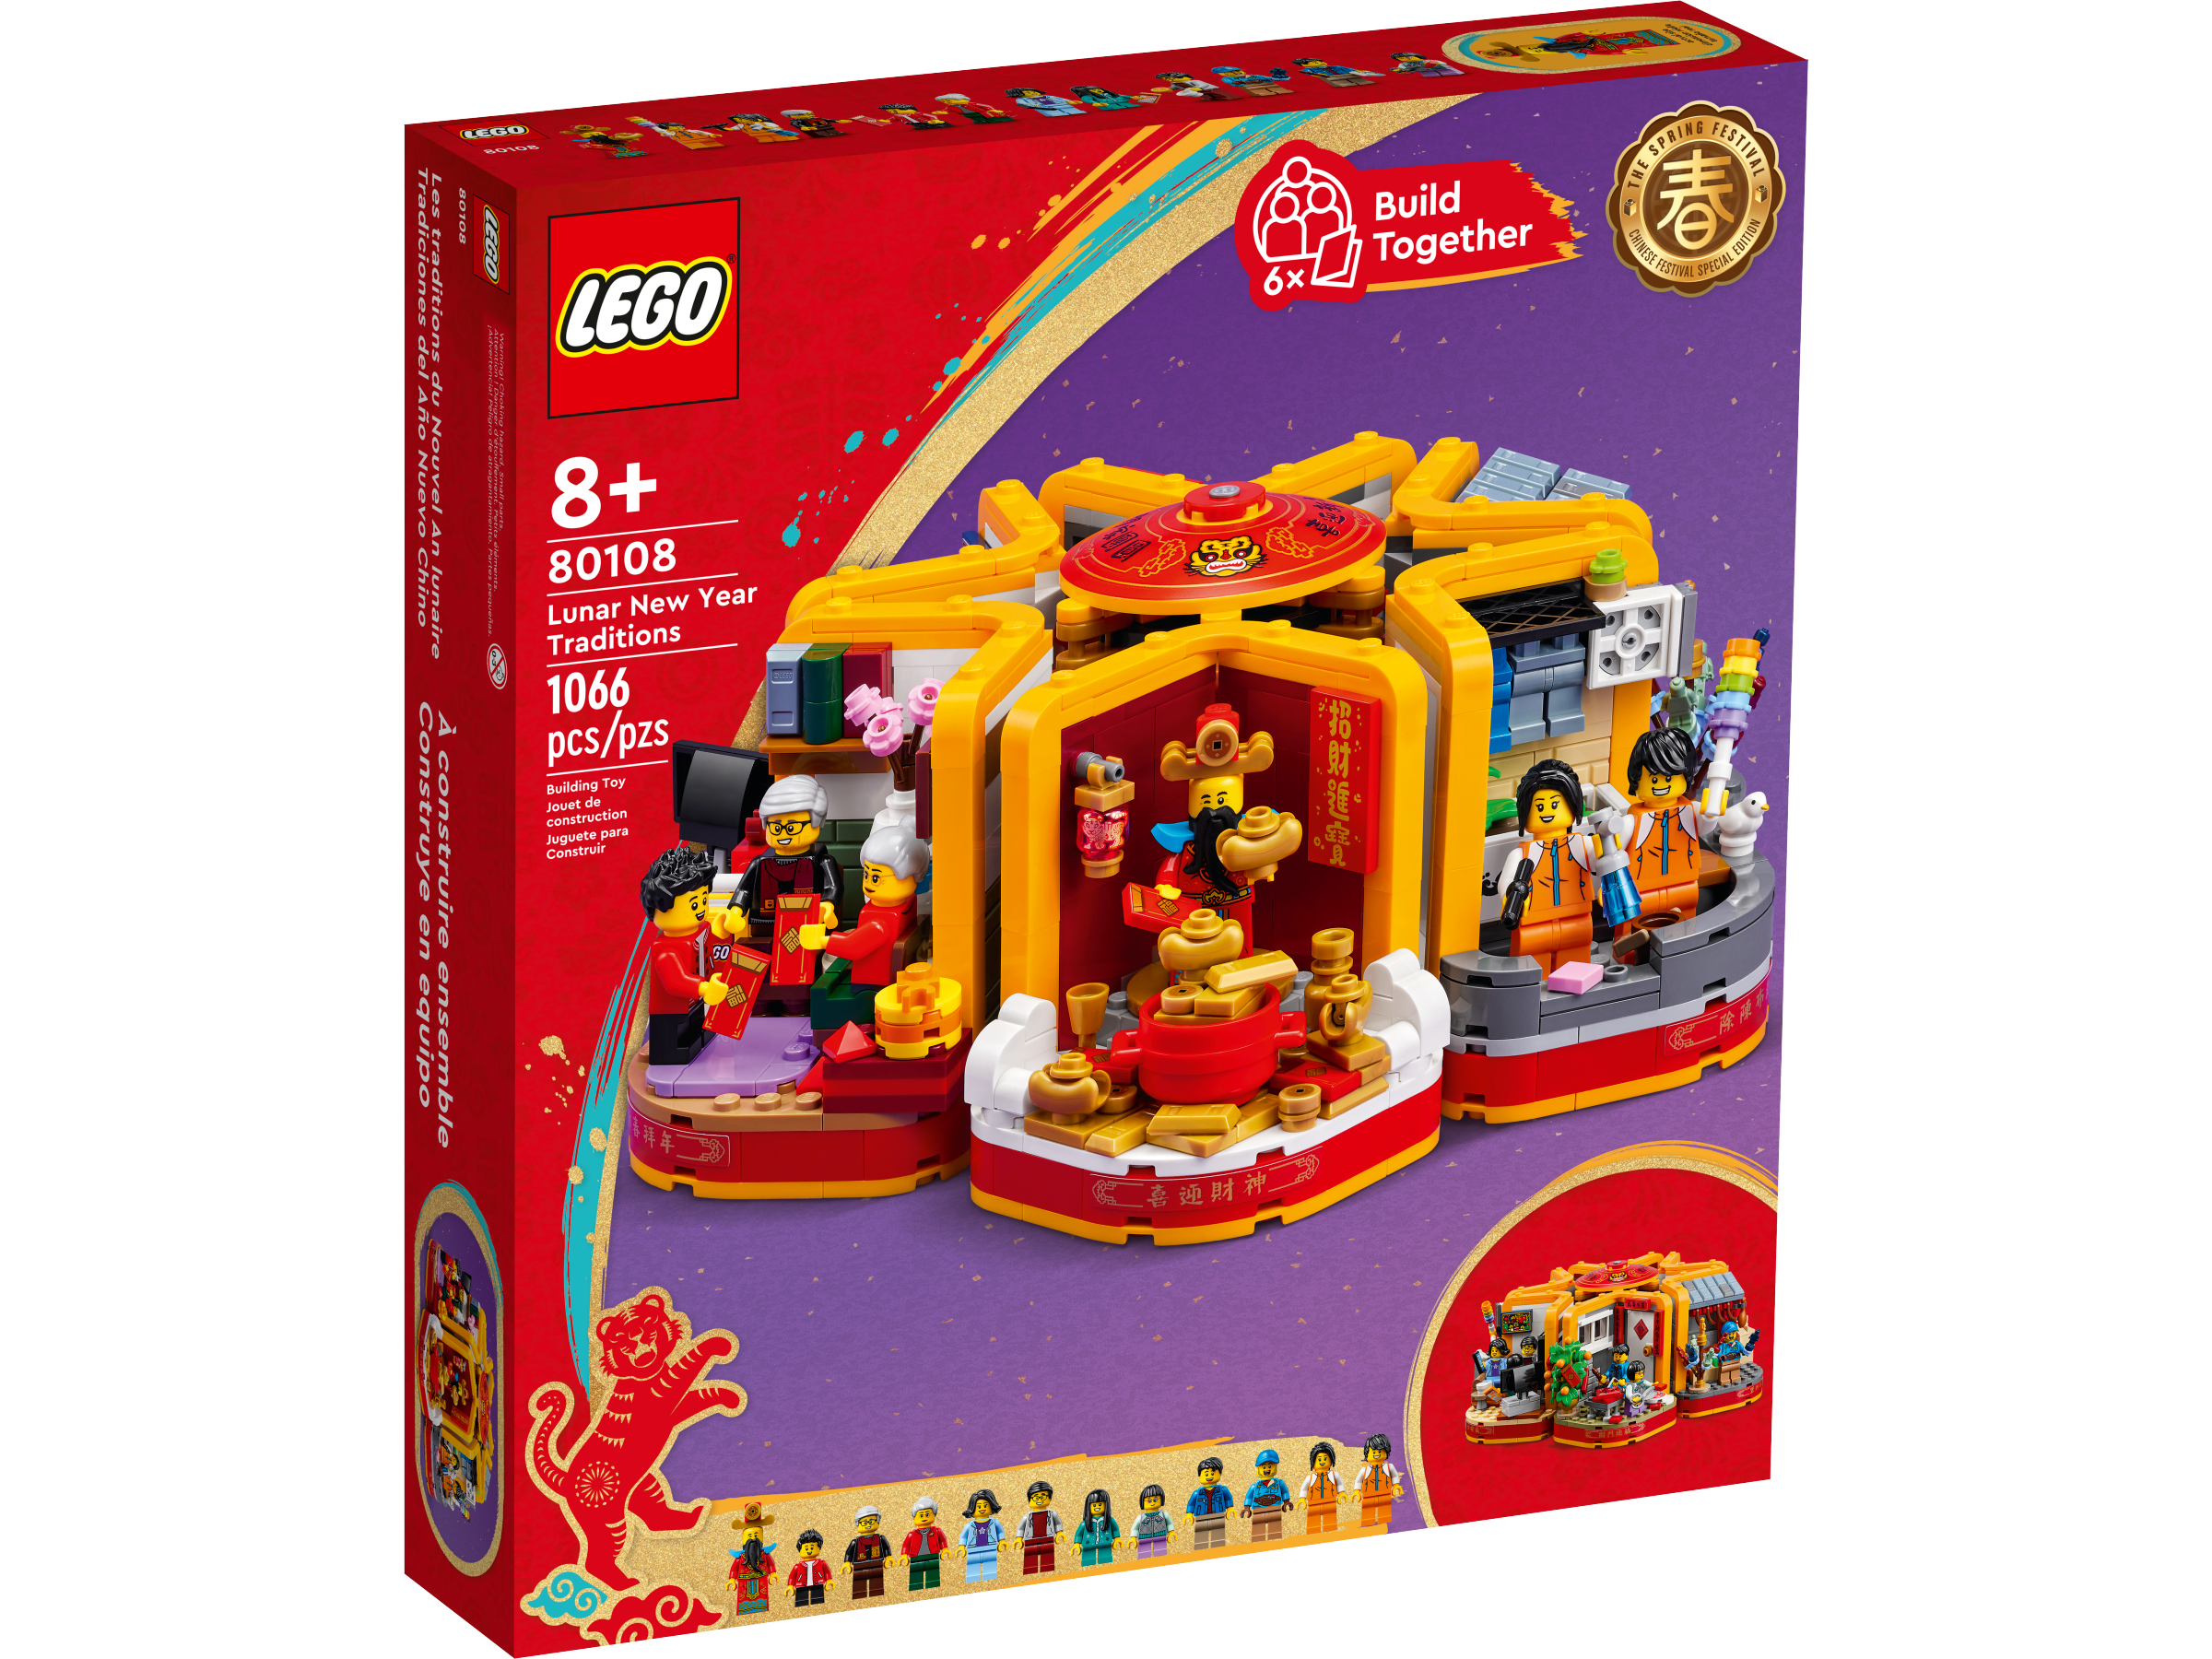 1 Set of 12 Lego Minifigures from #80108 Lunar New Year Traditions